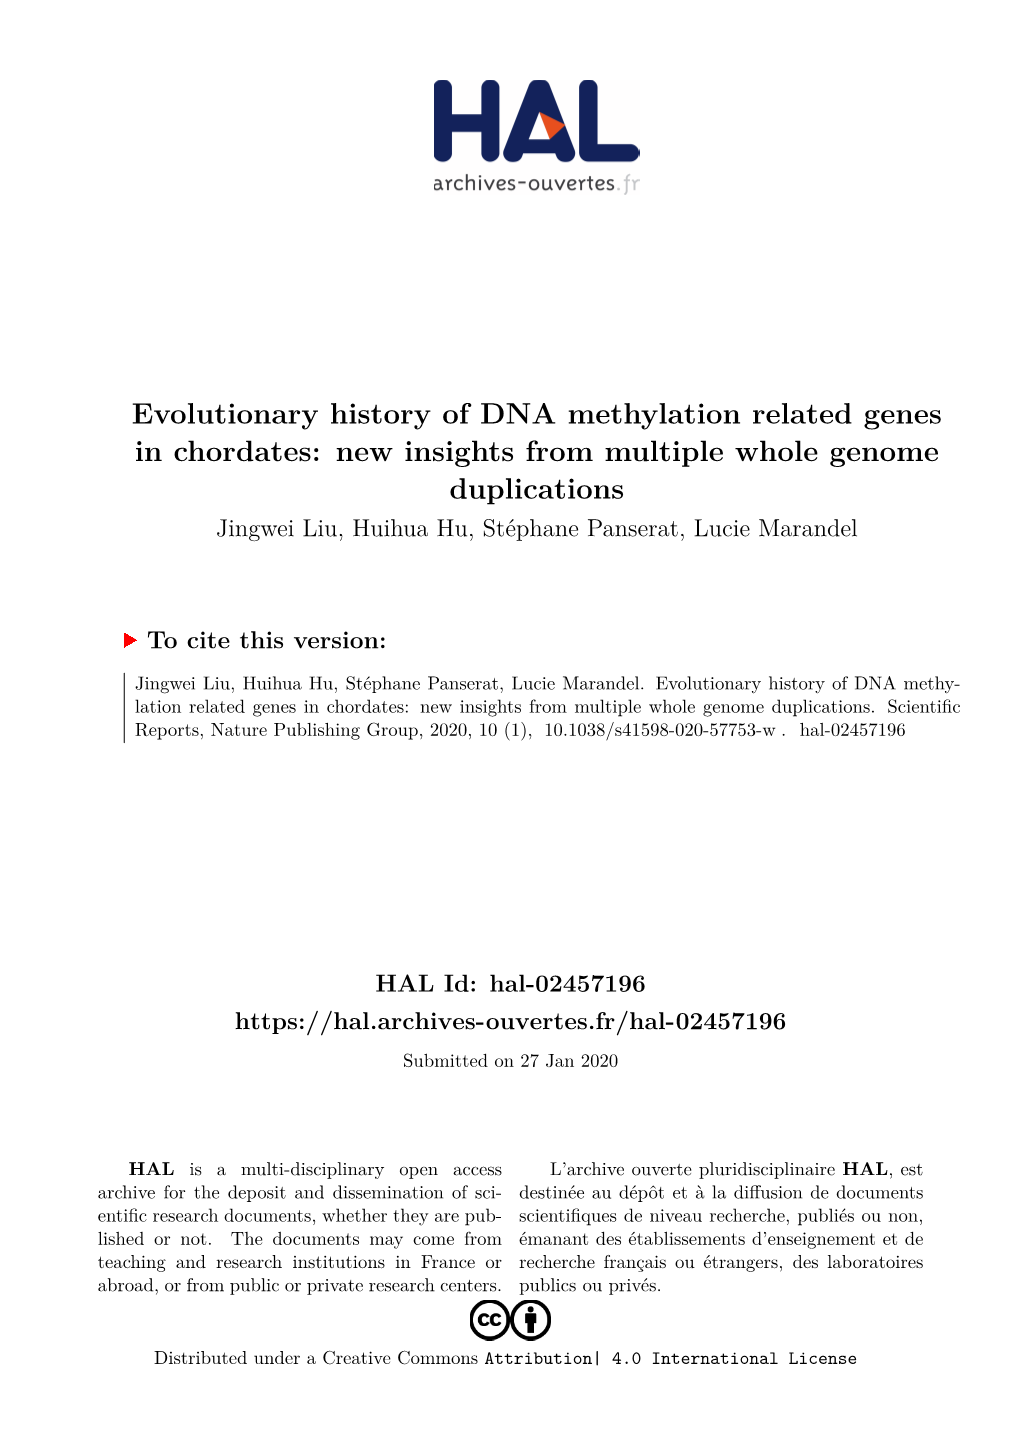 Evolutionary History of DNA Methylation Related Genes In